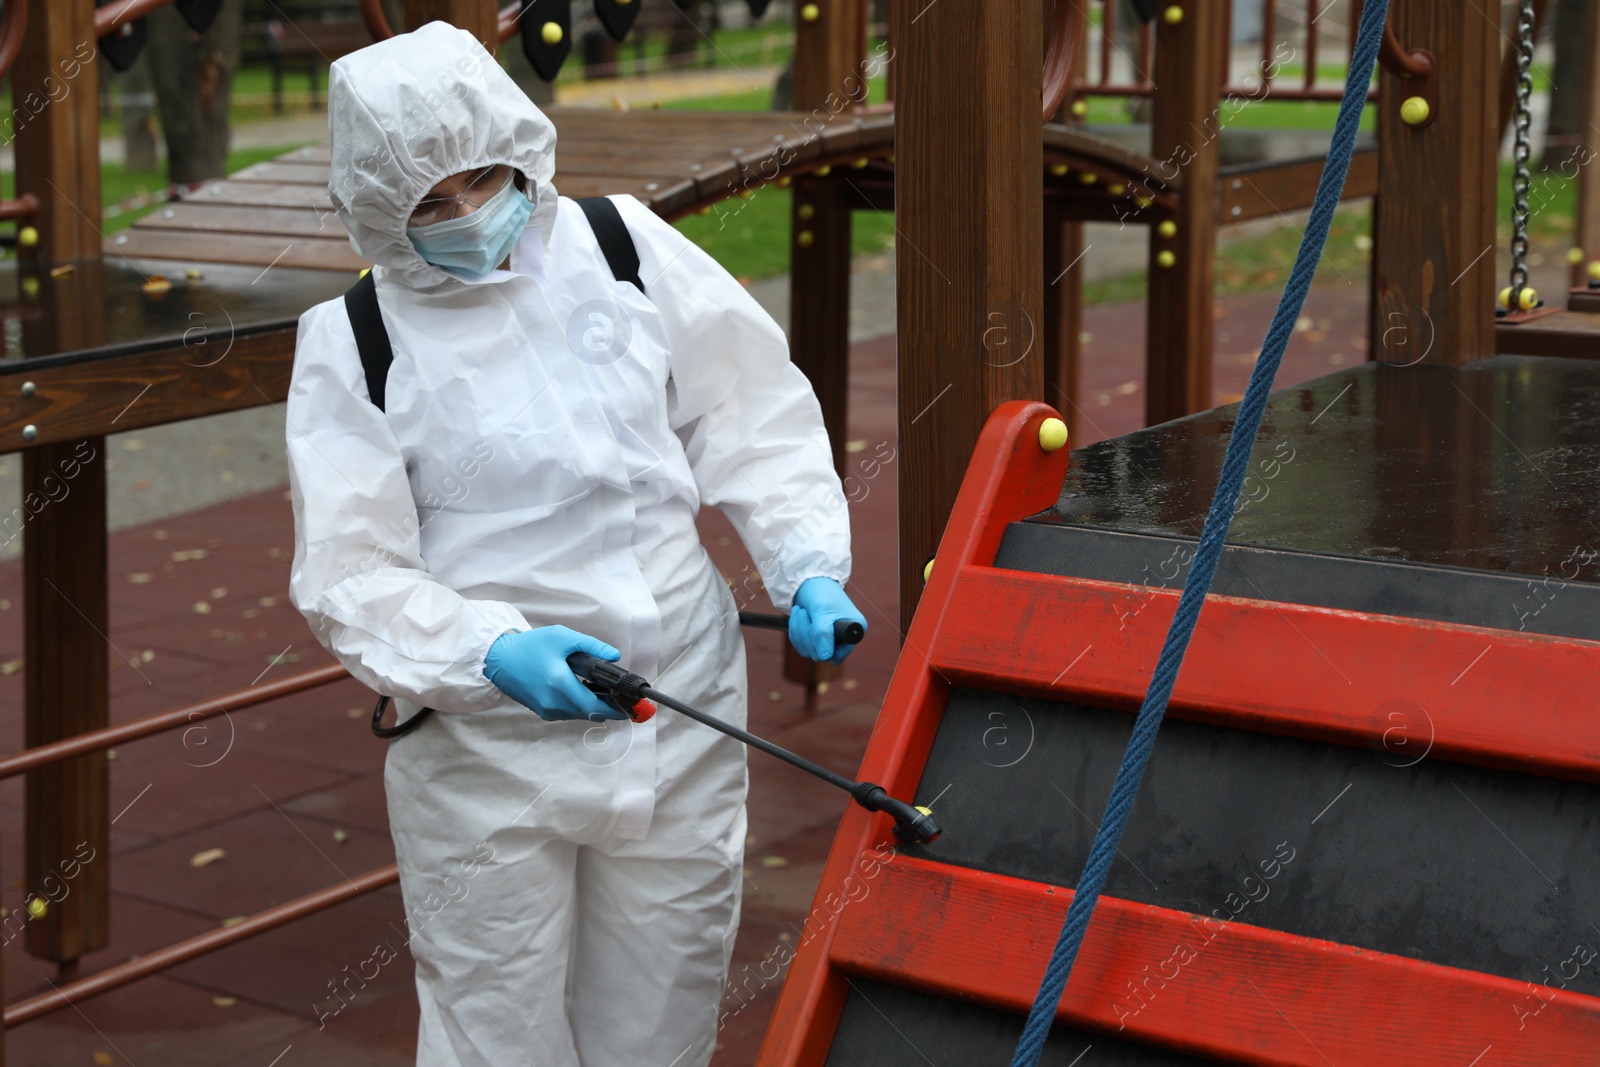 Photo of Woman wearing chemical protective suit with disinfectant sprayer on playground. Preventive measure during coronavirus pandemic